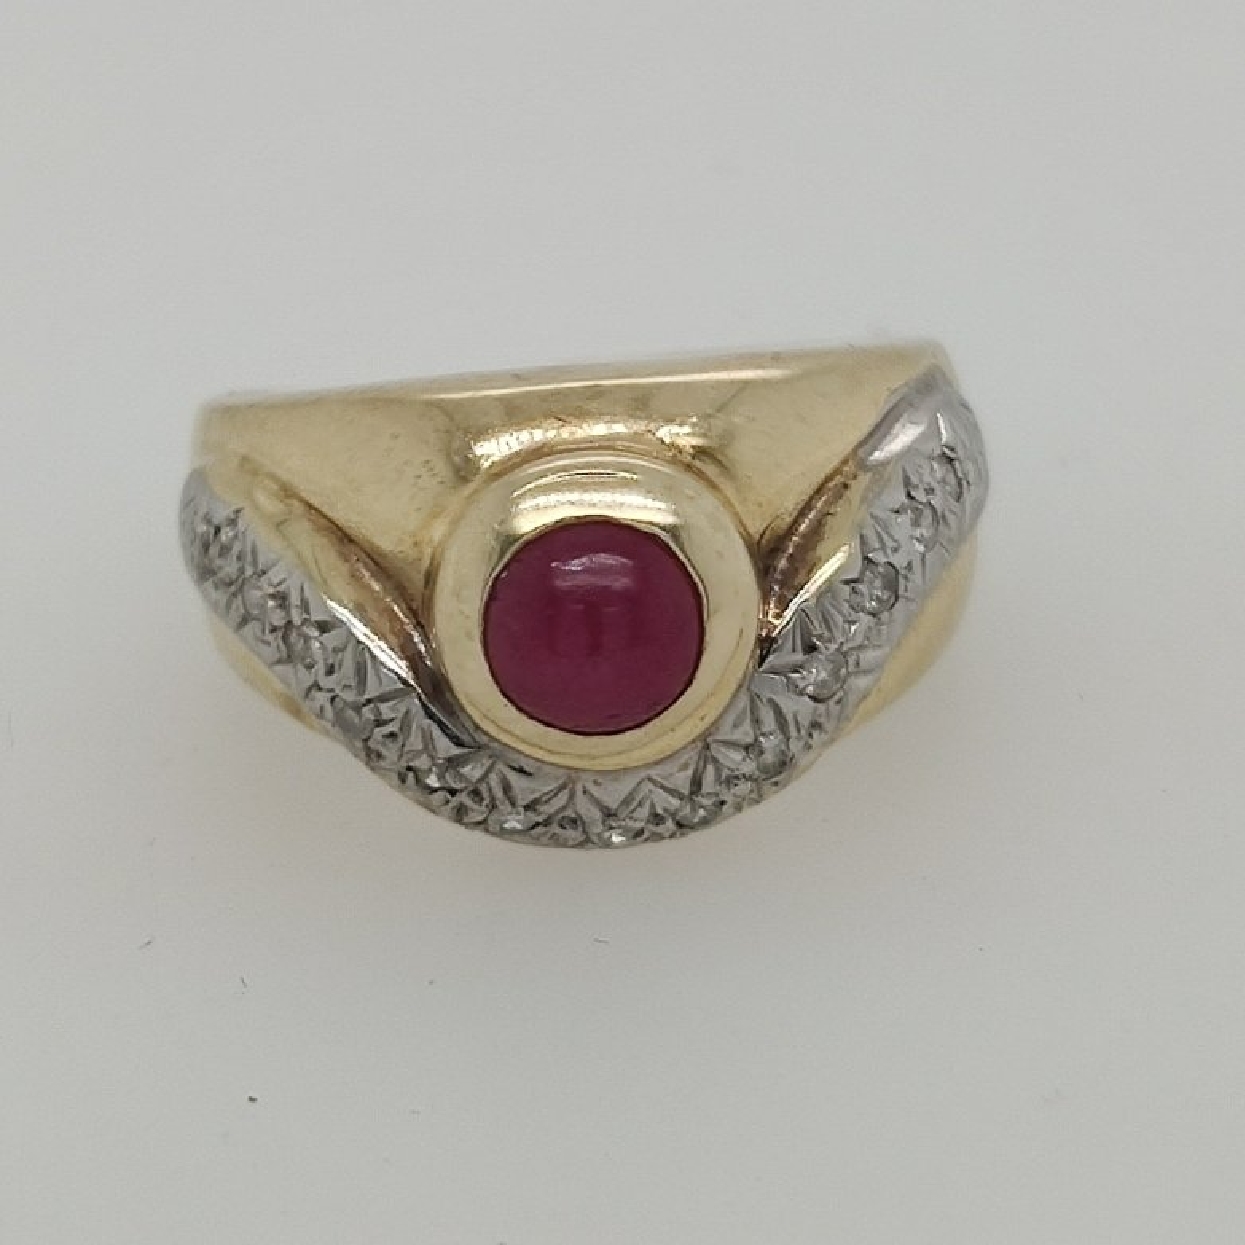 10K Yellow Gold Band with Cabachon Cut Ruby and Diamond Accents; Size 8